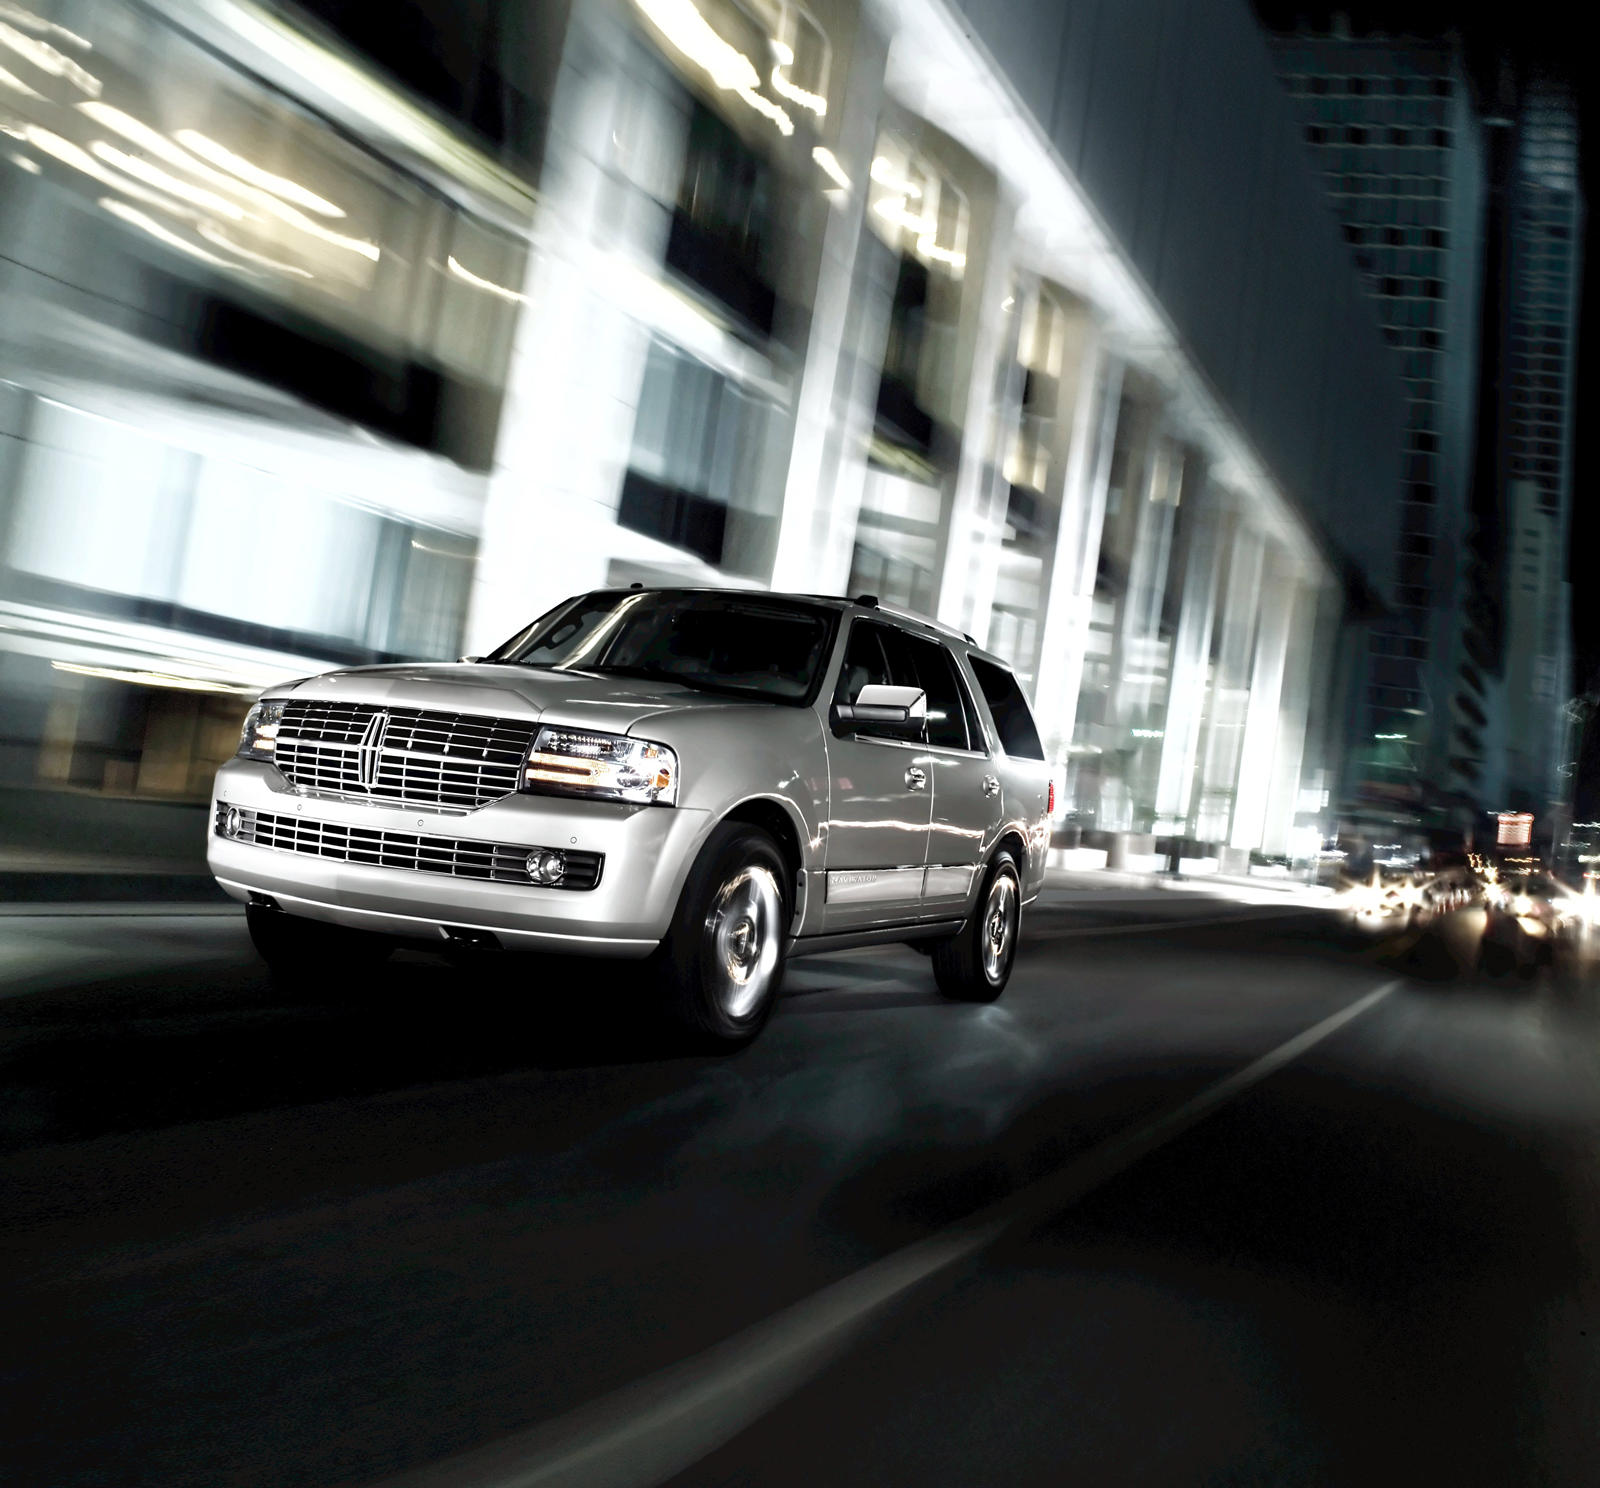 2008 Lincoln Navigator Front View Driving